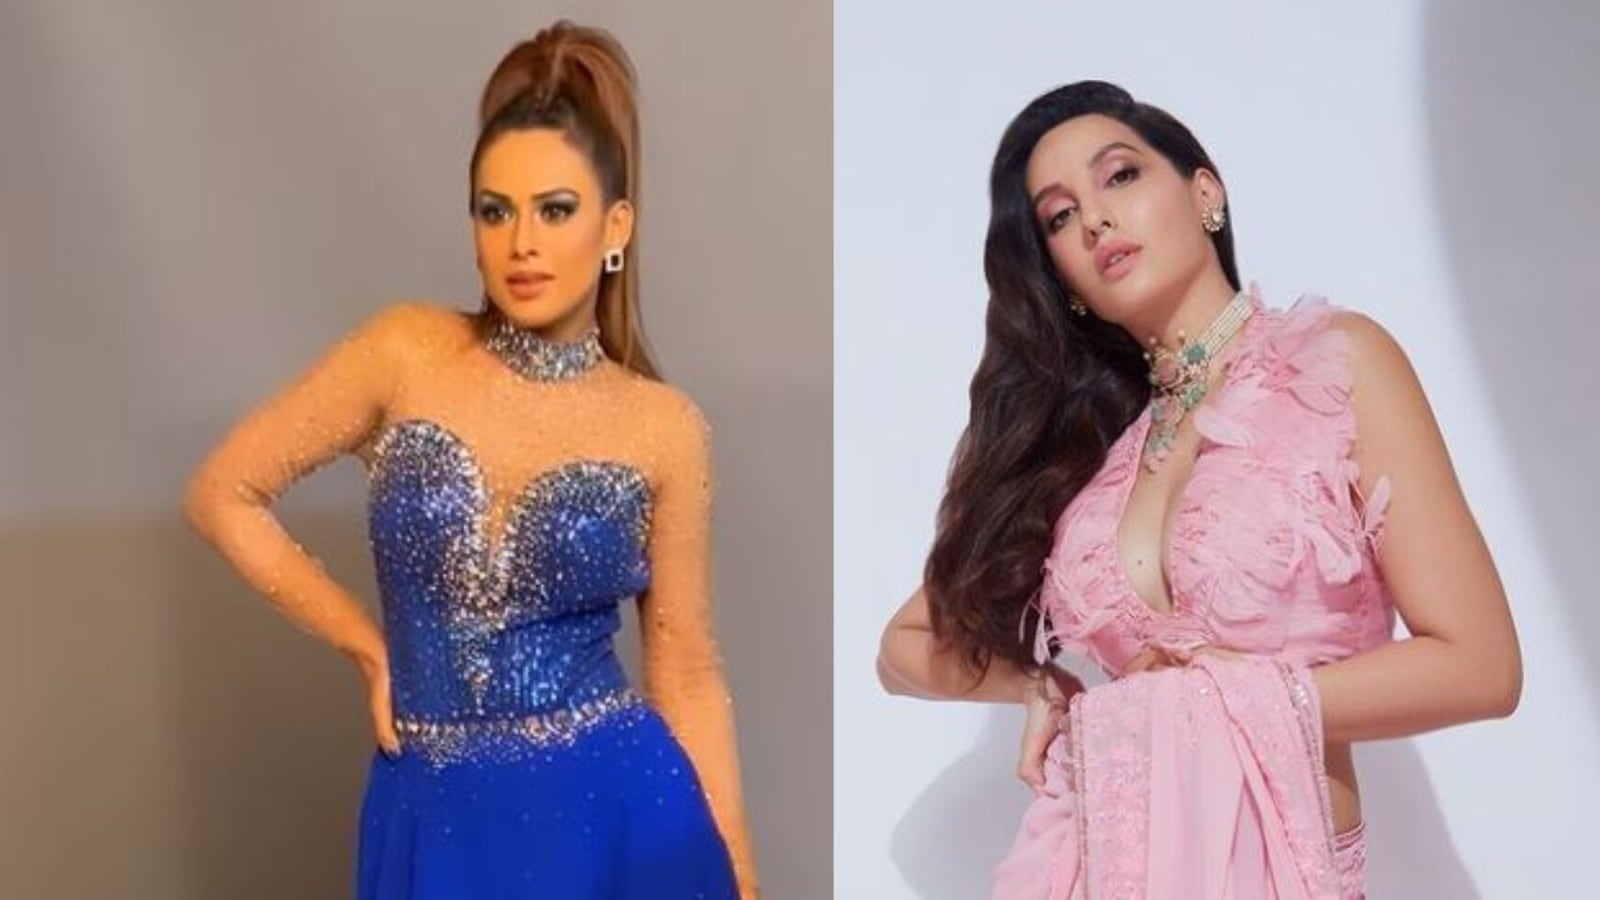 Nia Sharma says she relates to Jhalak Dikhhla Jaa 10 judge Nora Fatehi’s dancing: ‘I am less on grace, more on madness’